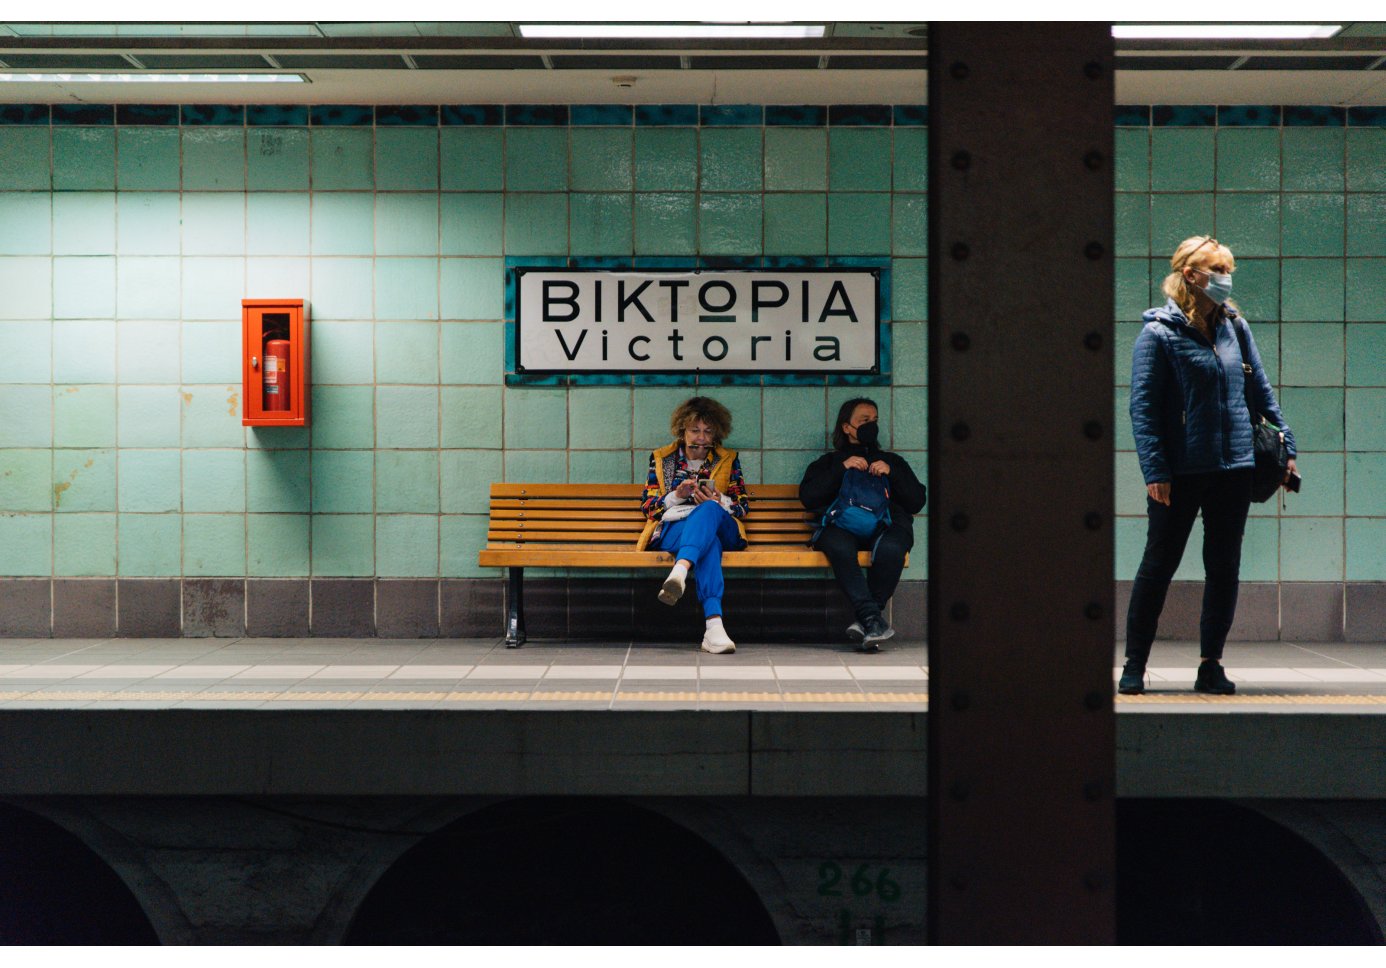 a metro platform with green tiles, two women sitting on a bench, one standing, a sign that reads "Victoria"